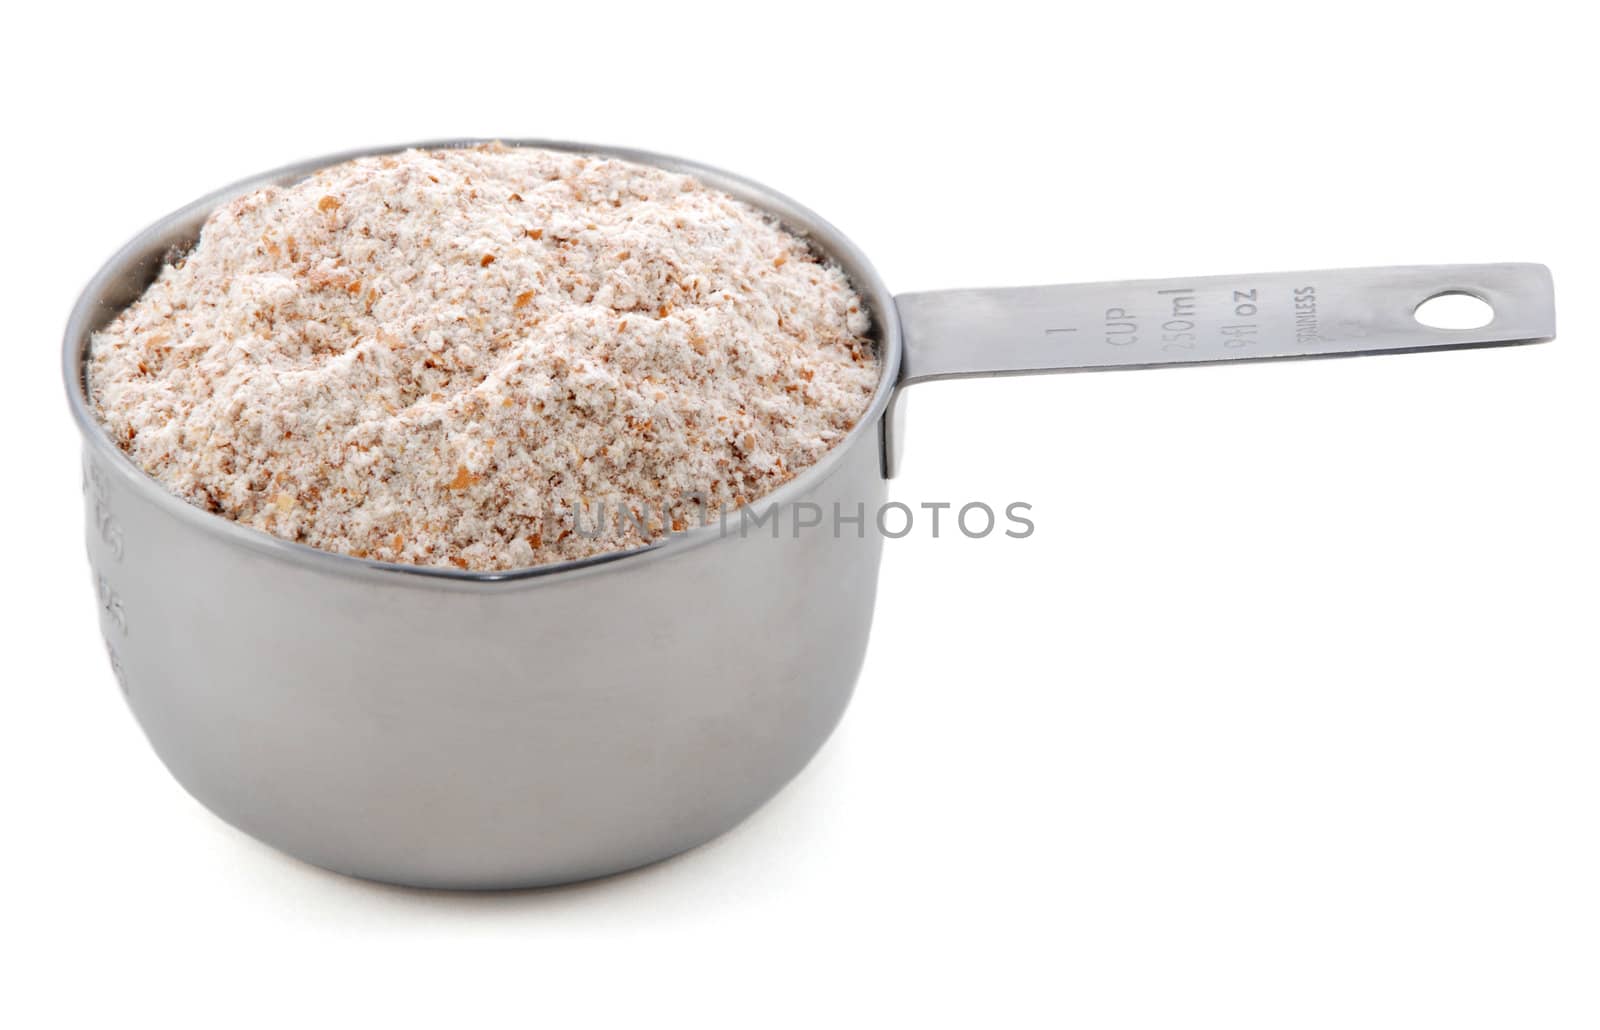 Wholemeal / wheatmeal / brown flour presented in an American metal cup measure, isolated on a white background